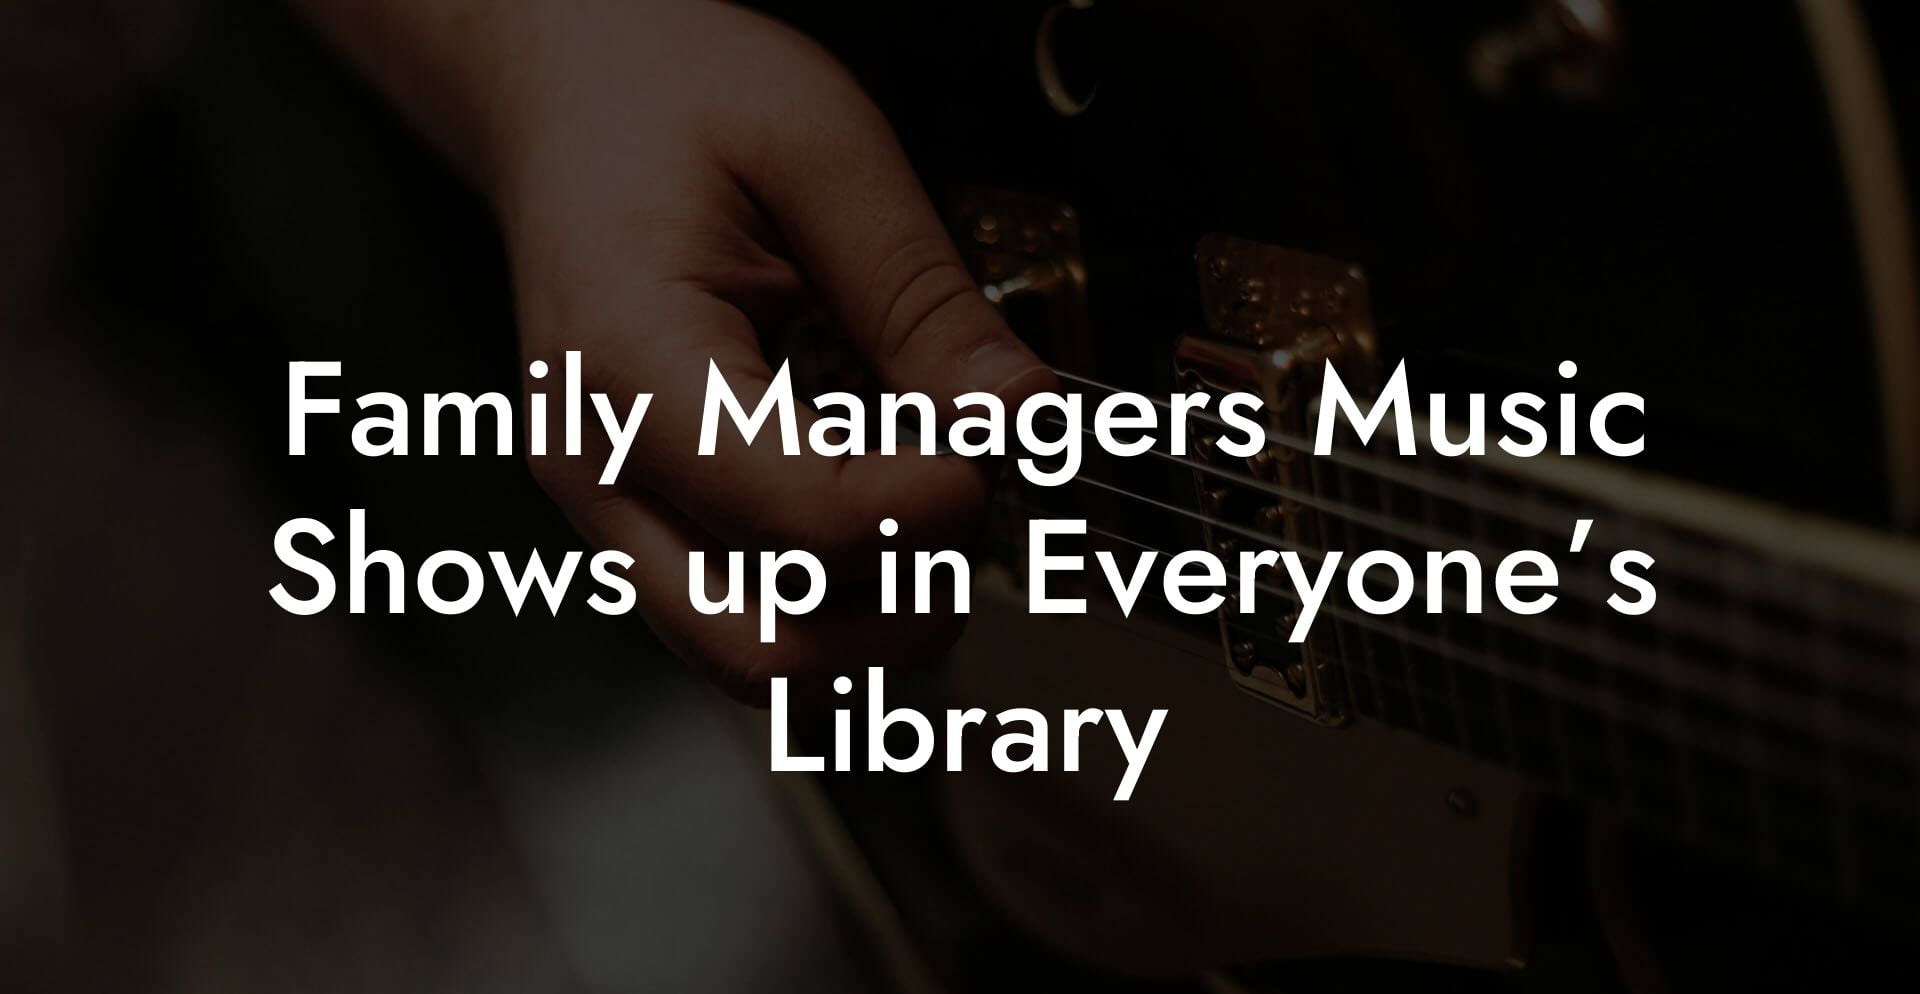 Family Managers Music Shows up in Everyone’s Library